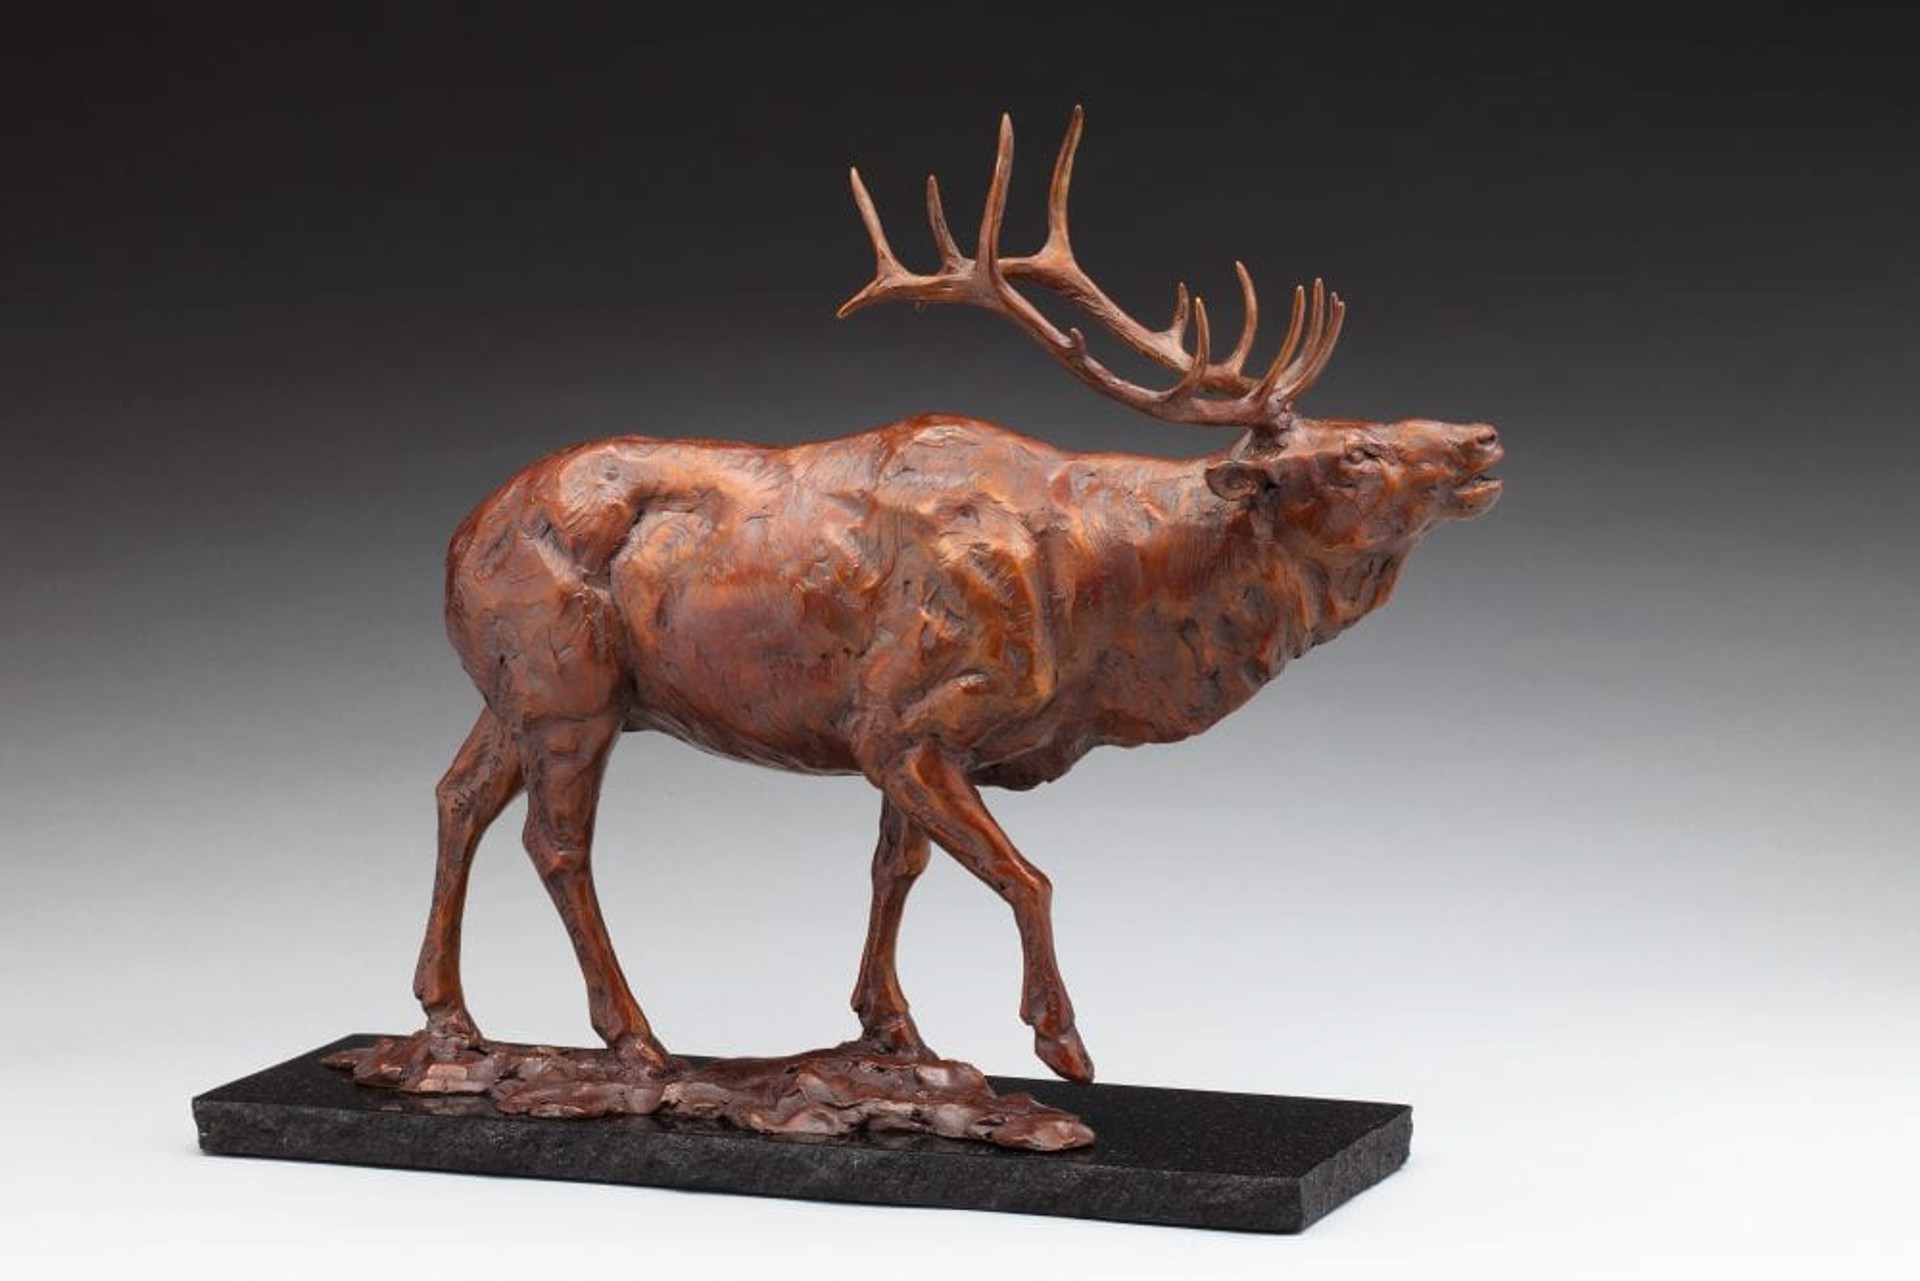 About to Get Serious Elk by Daniel Glanz (sculptor)